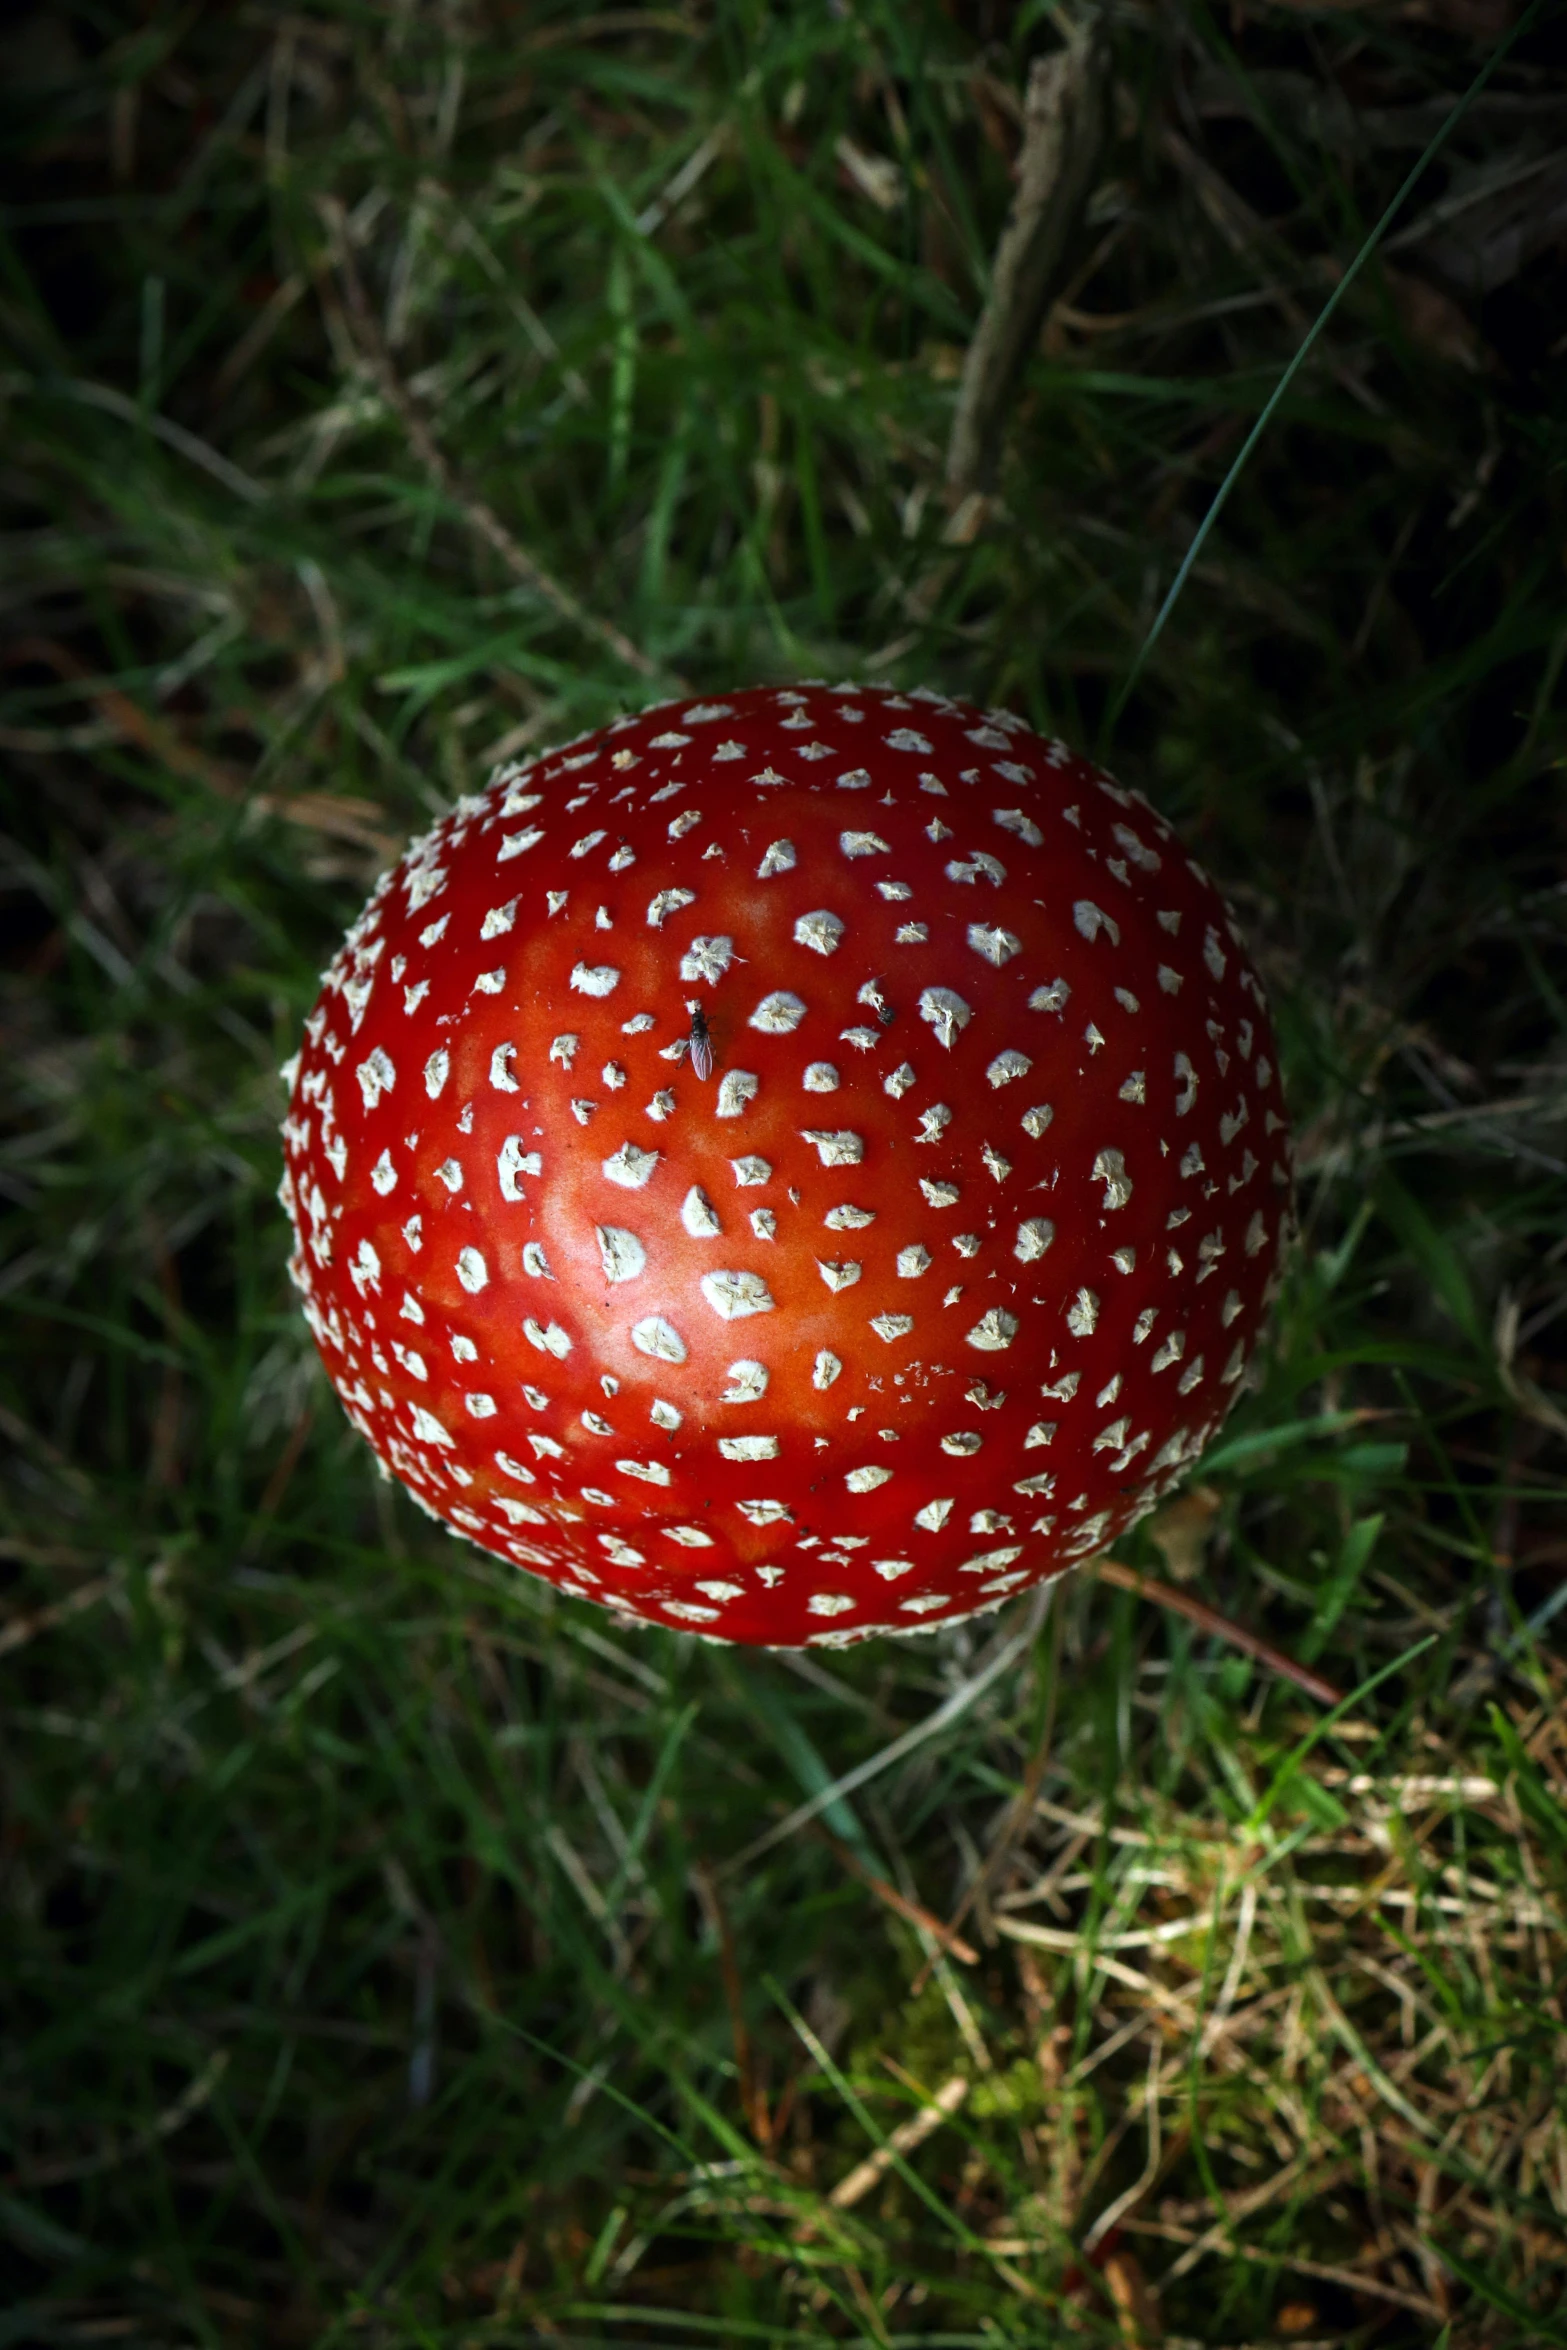 a red dotted object on grass with little holes in it